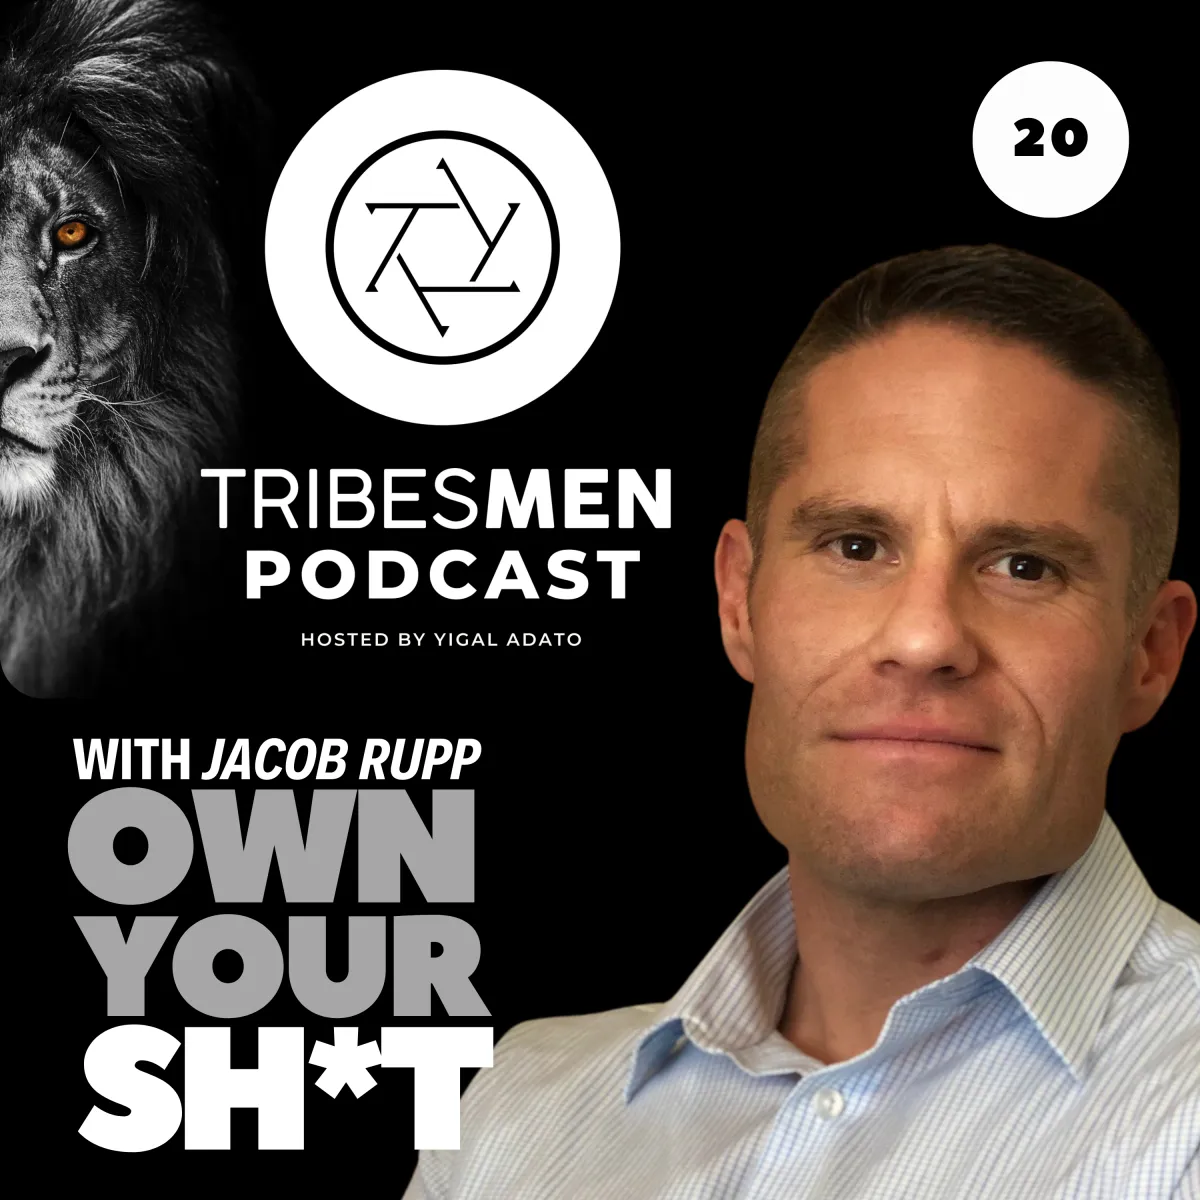 Tribesmen Podcast Episode 20 with Jacob Rupp